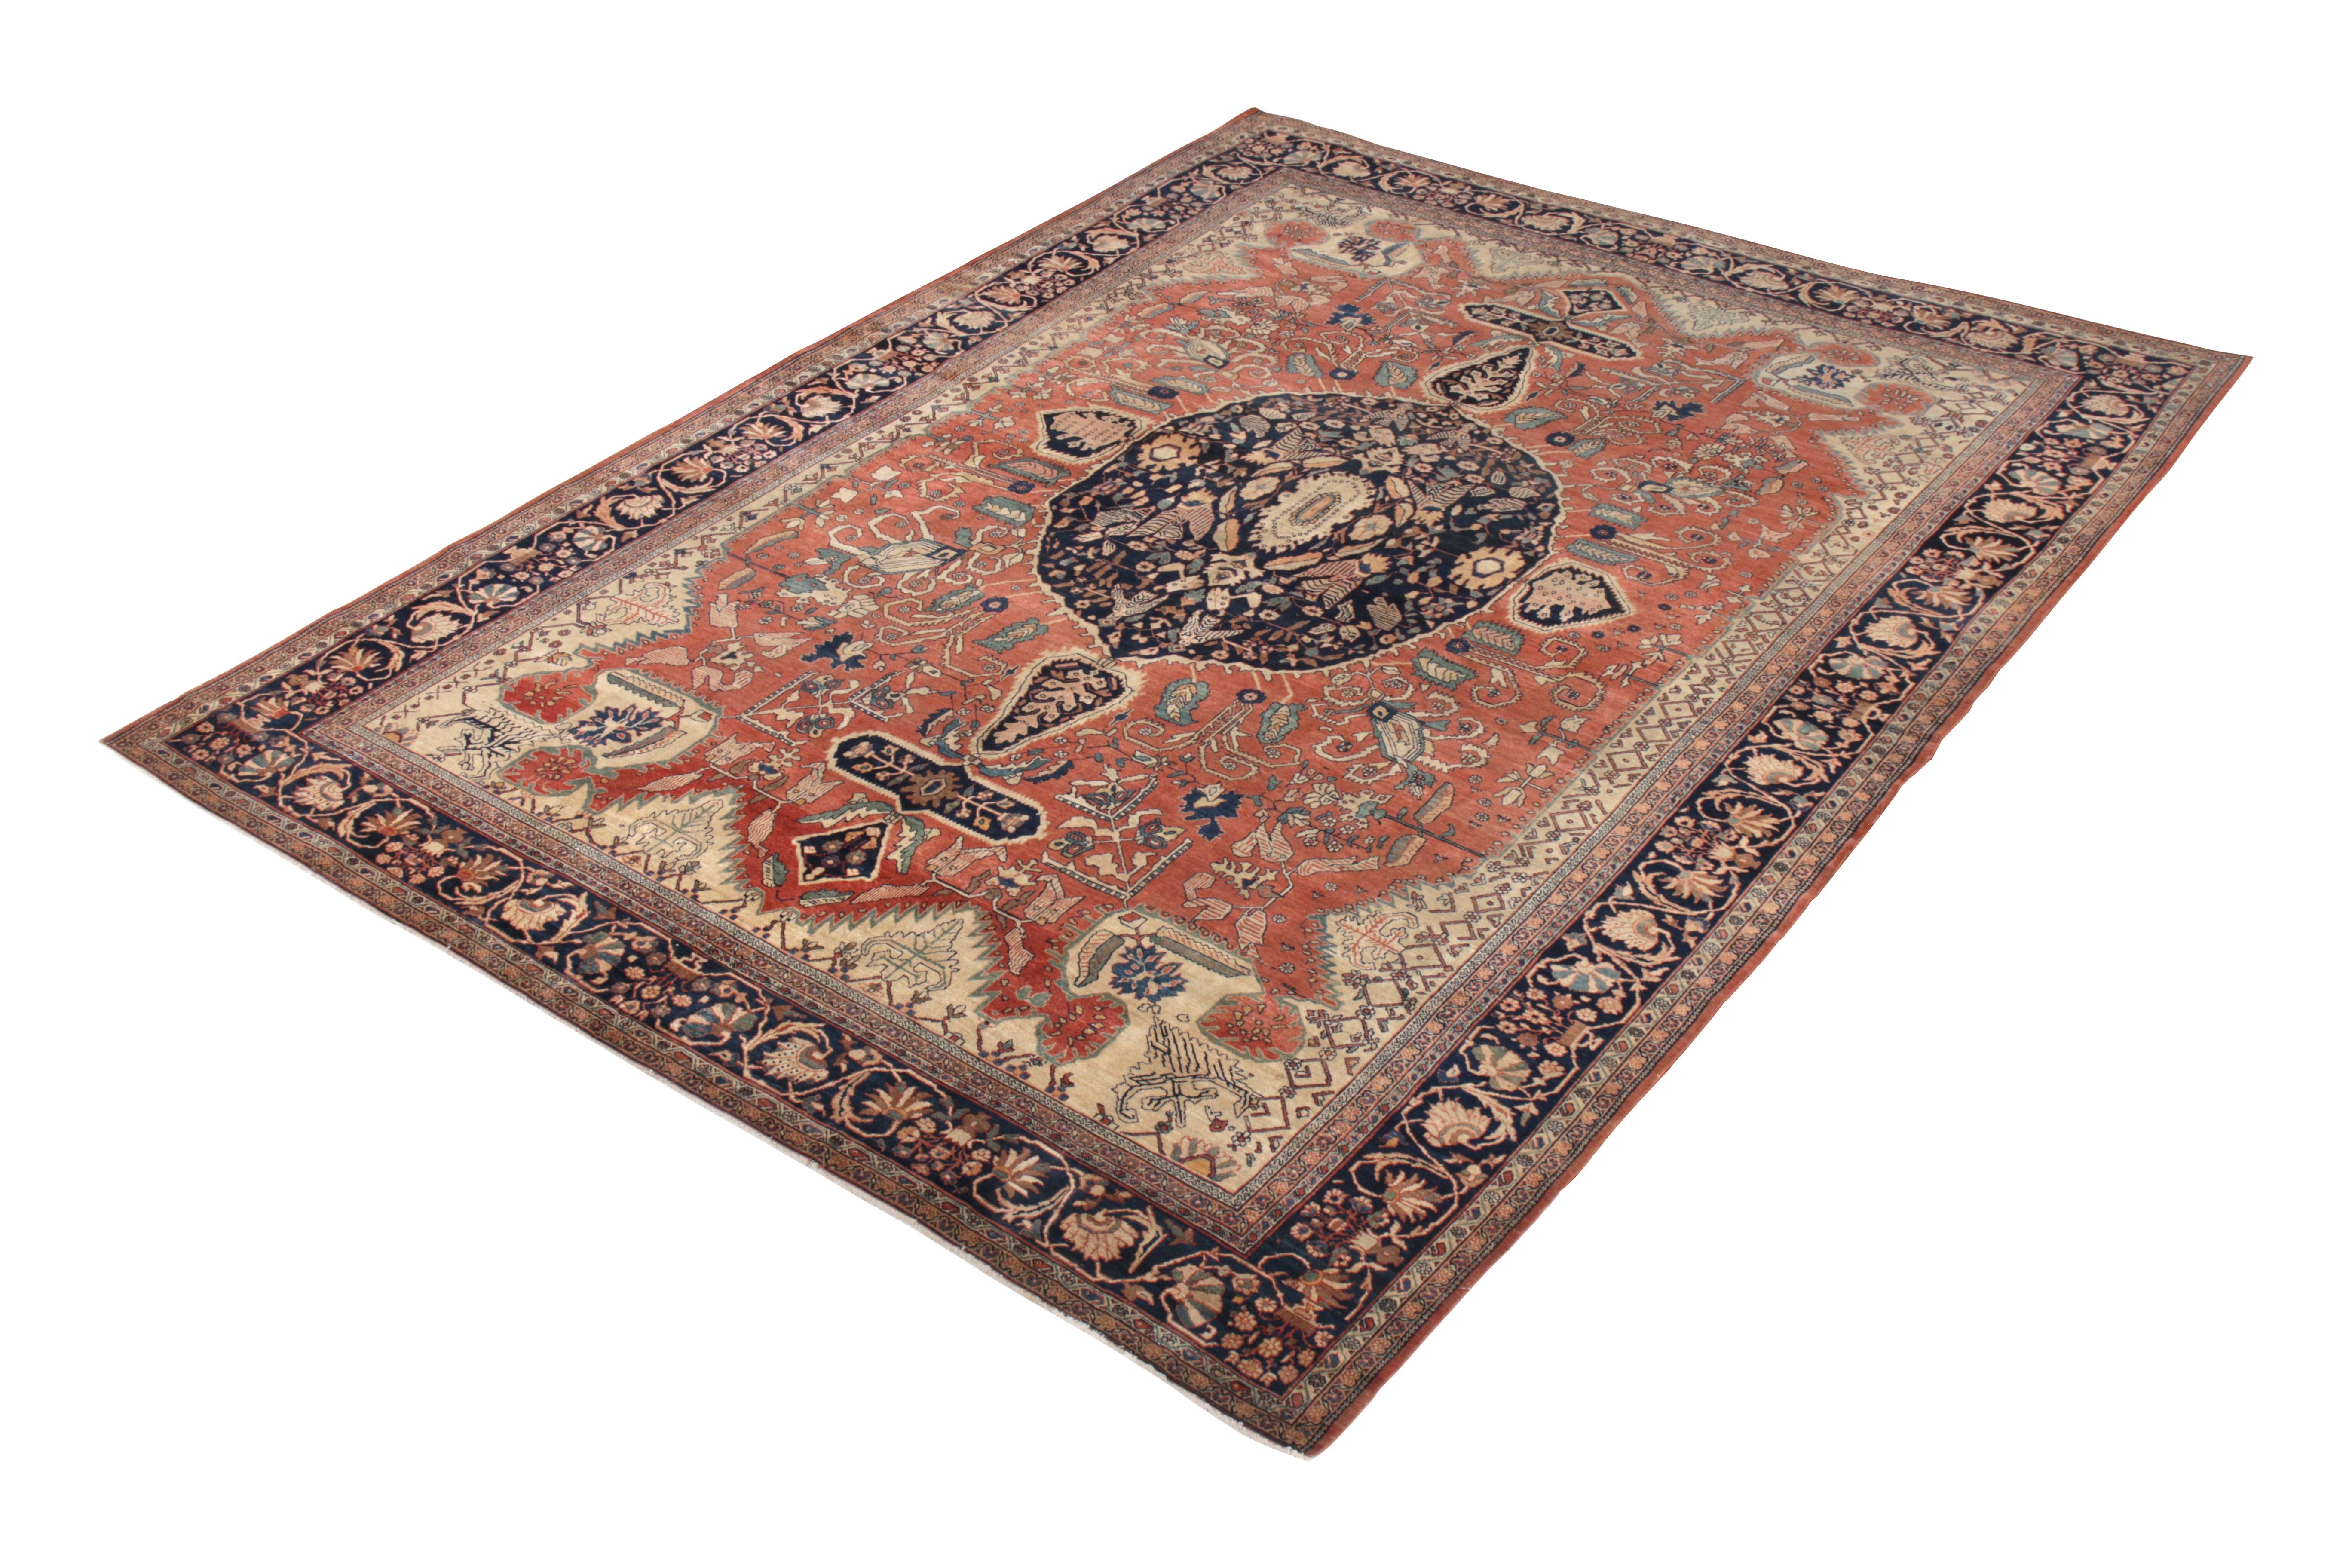 Hand knotted in wool originating circa 1900-1910, this 10 x 12 antique rug connotes a Farahan rug design of particular grandeur, depicting a regal medallion pattern in the deep blue colorway background accenting the prevailing, handsome red and